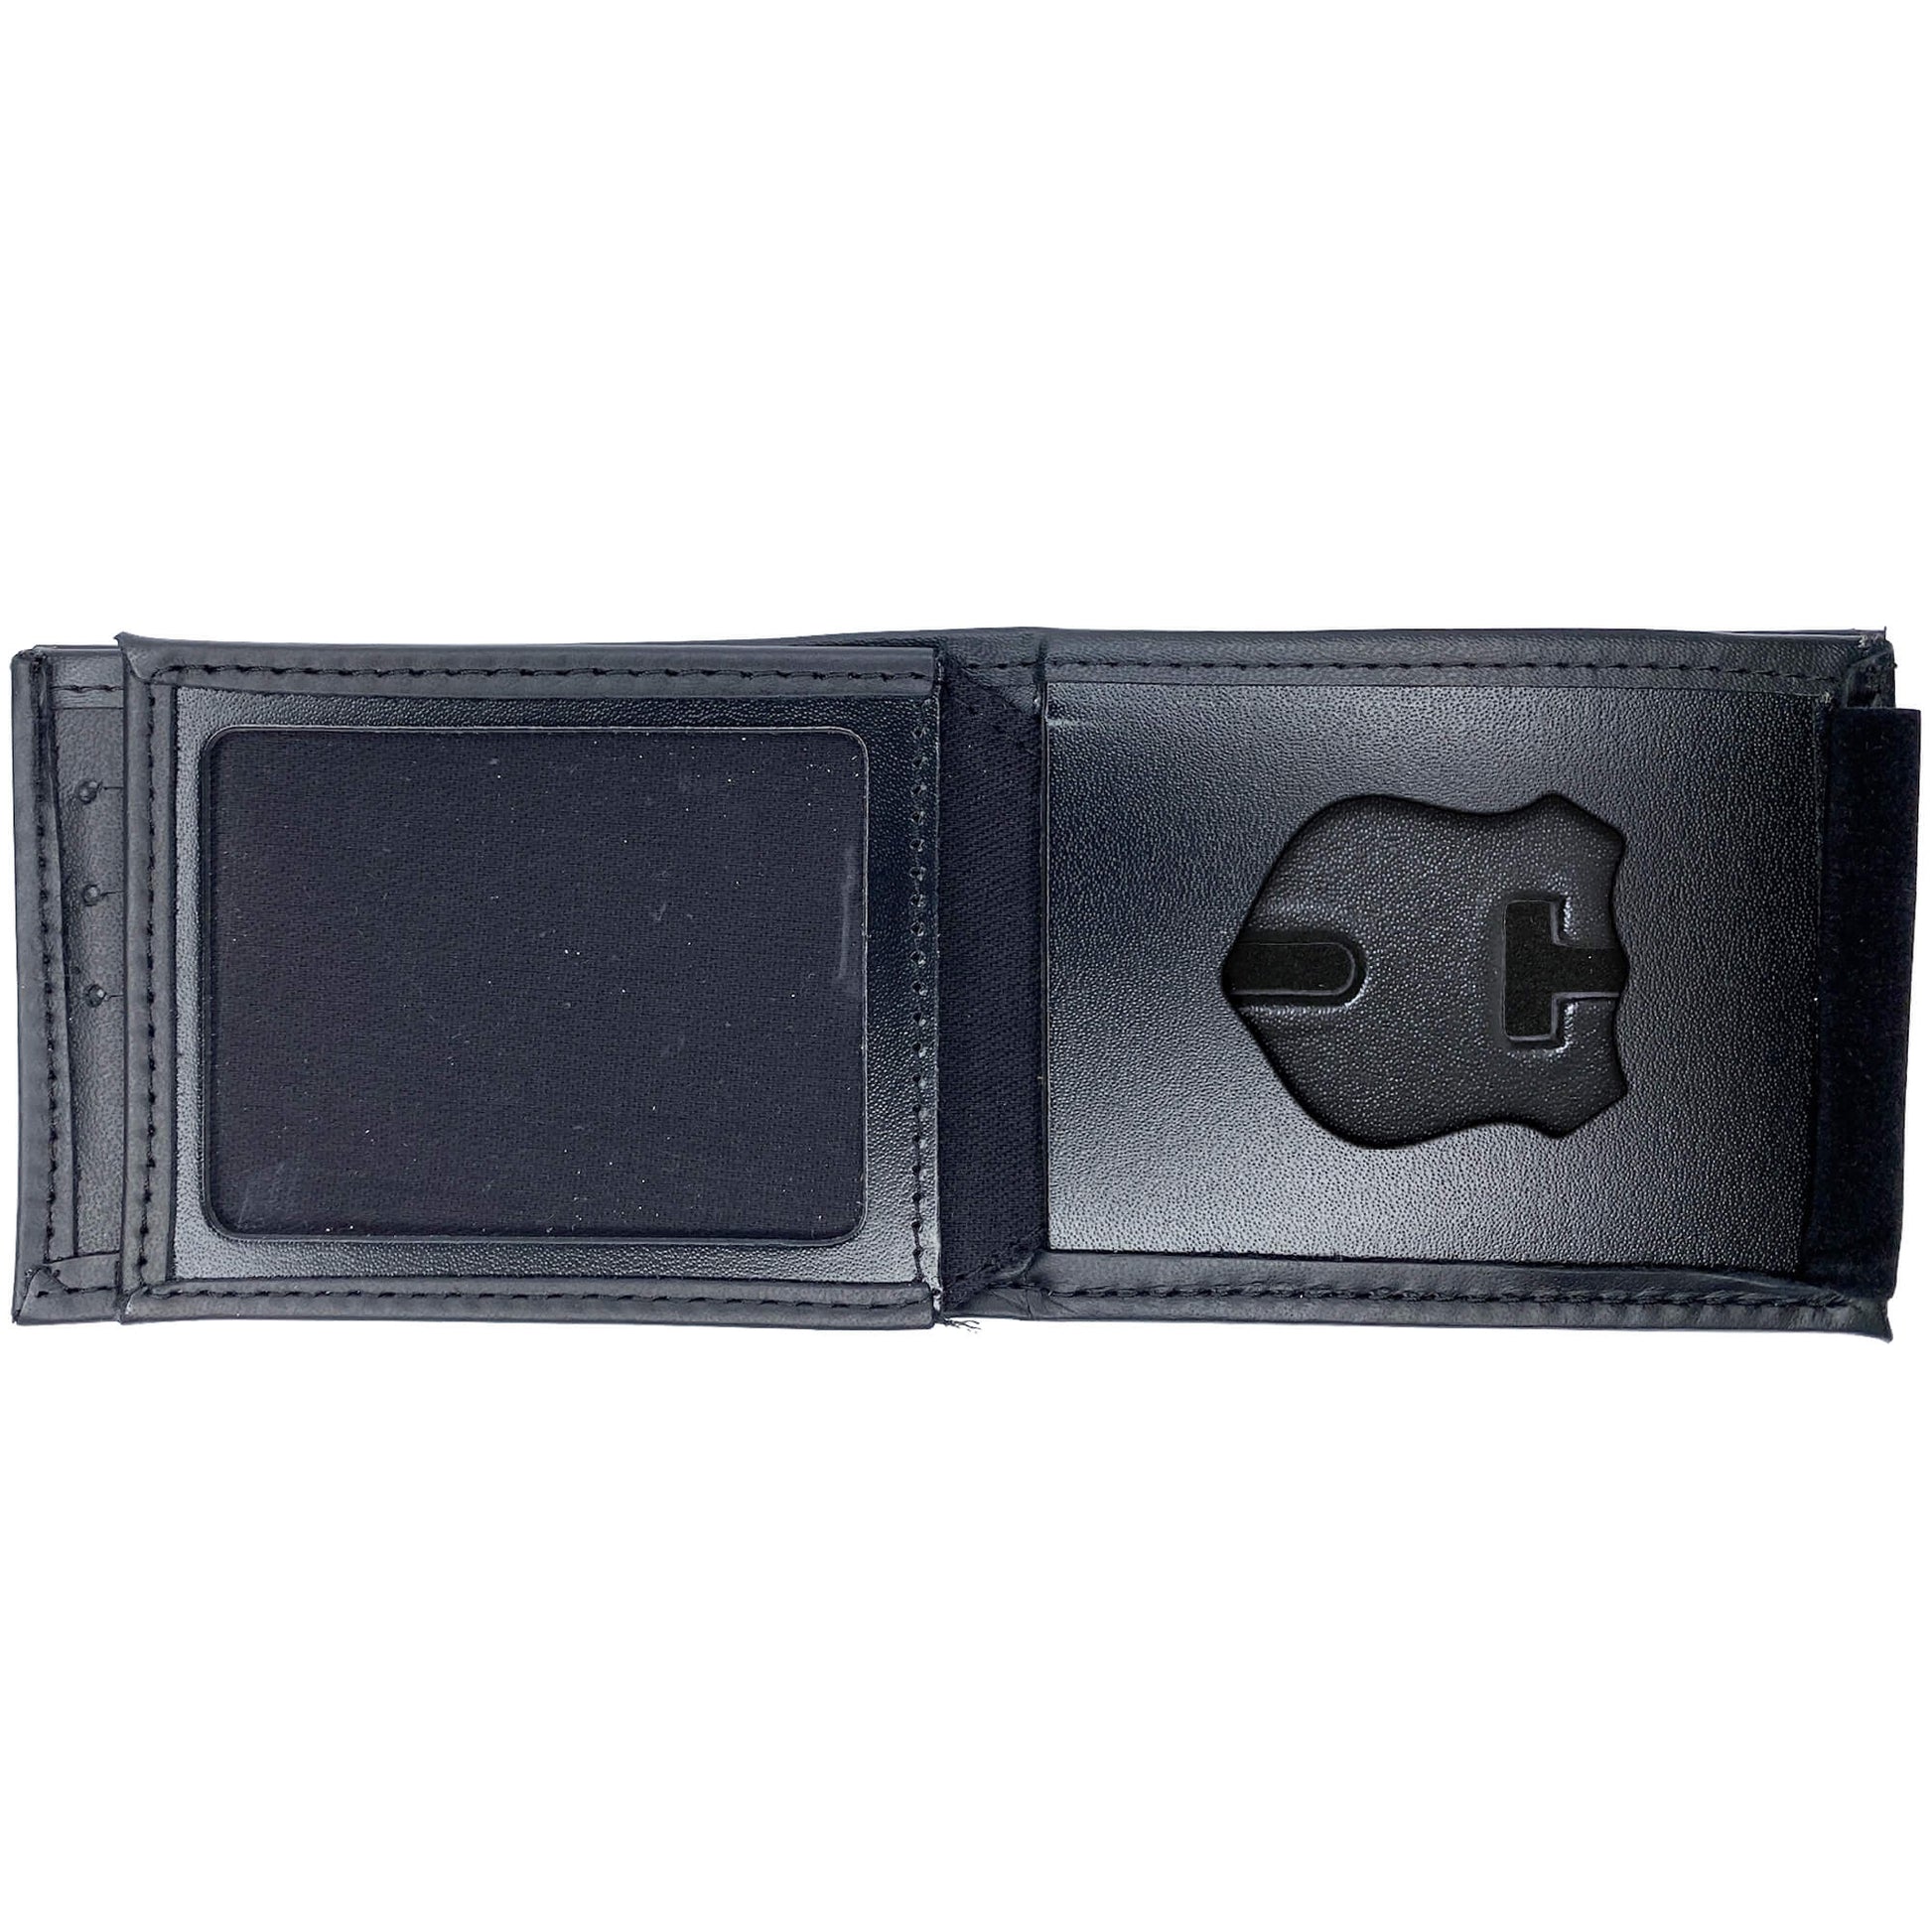 Military Police Officer Hidden Badge Wallet-Perfect Fit-911 Duty Gear Canada